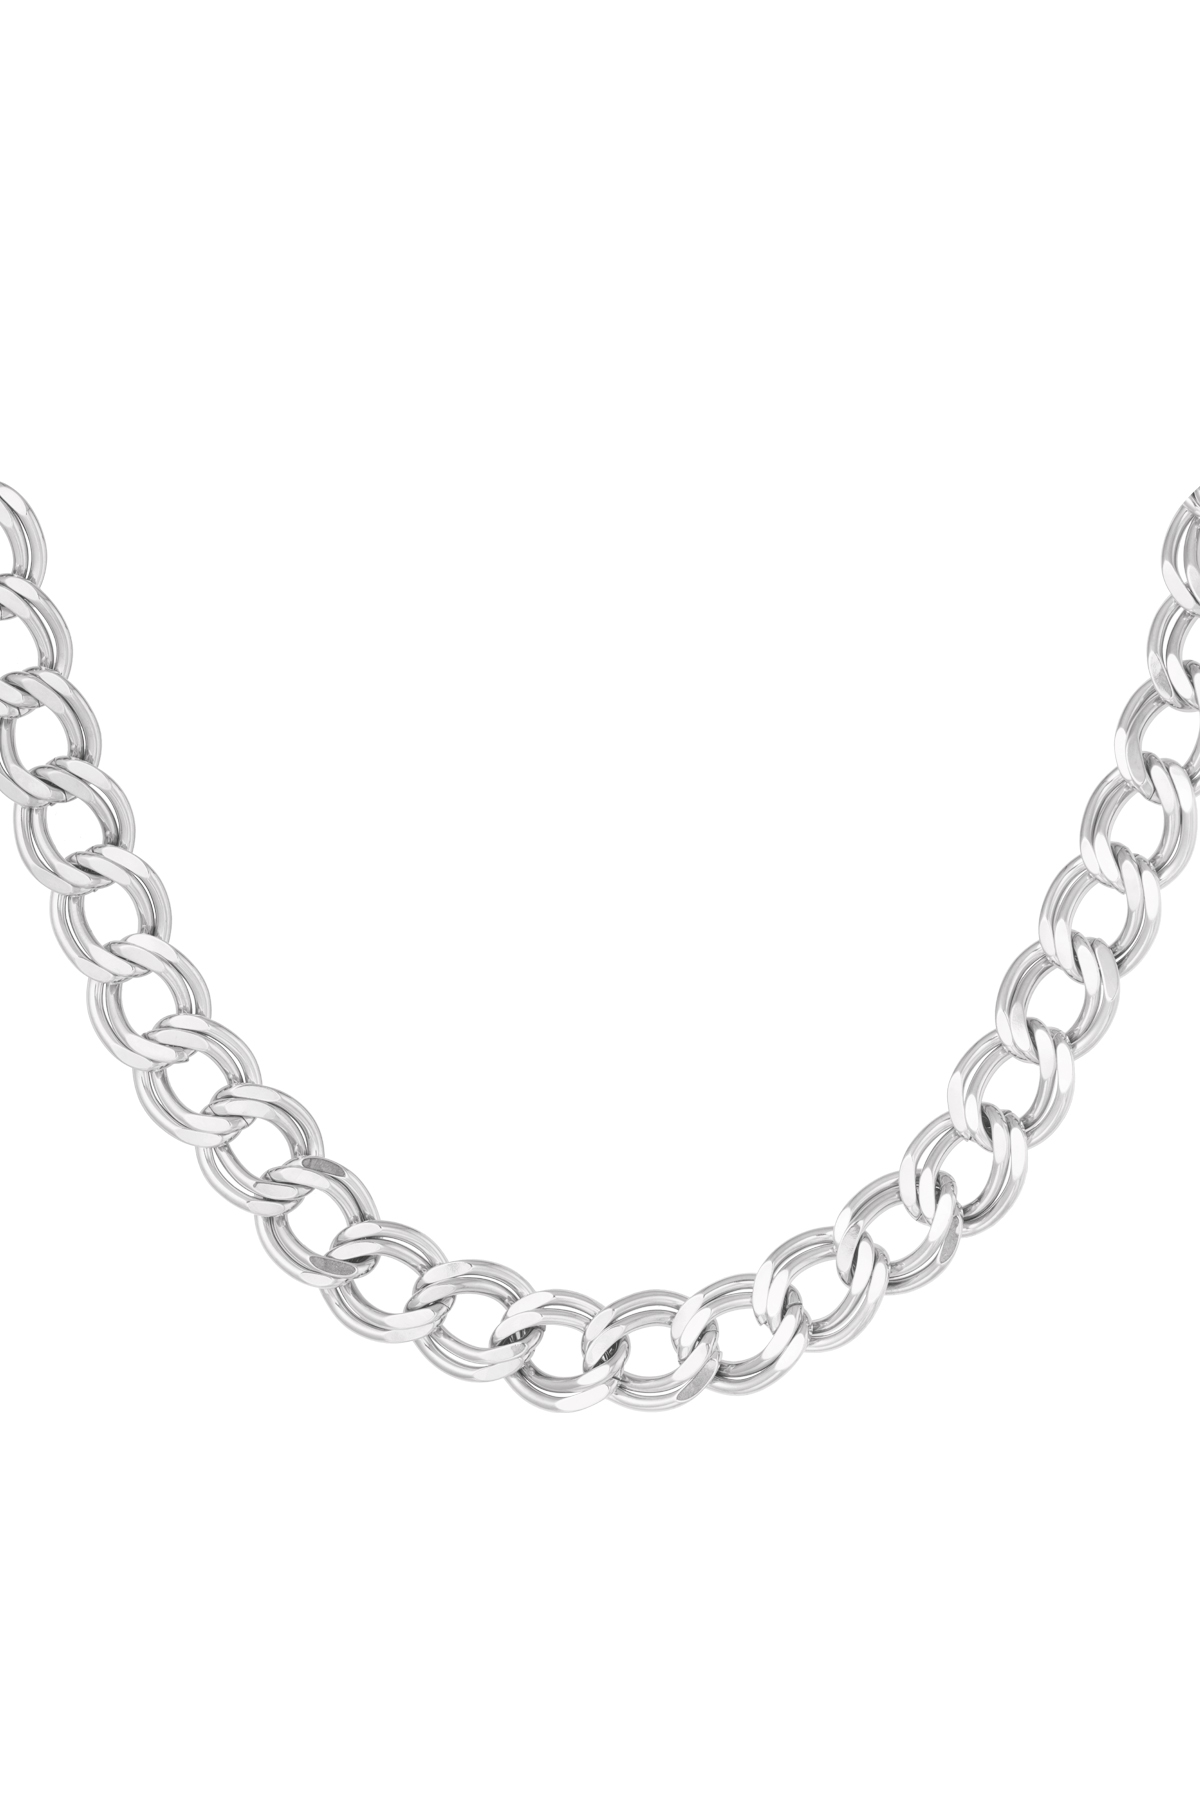 Chain thick links - silver h5 